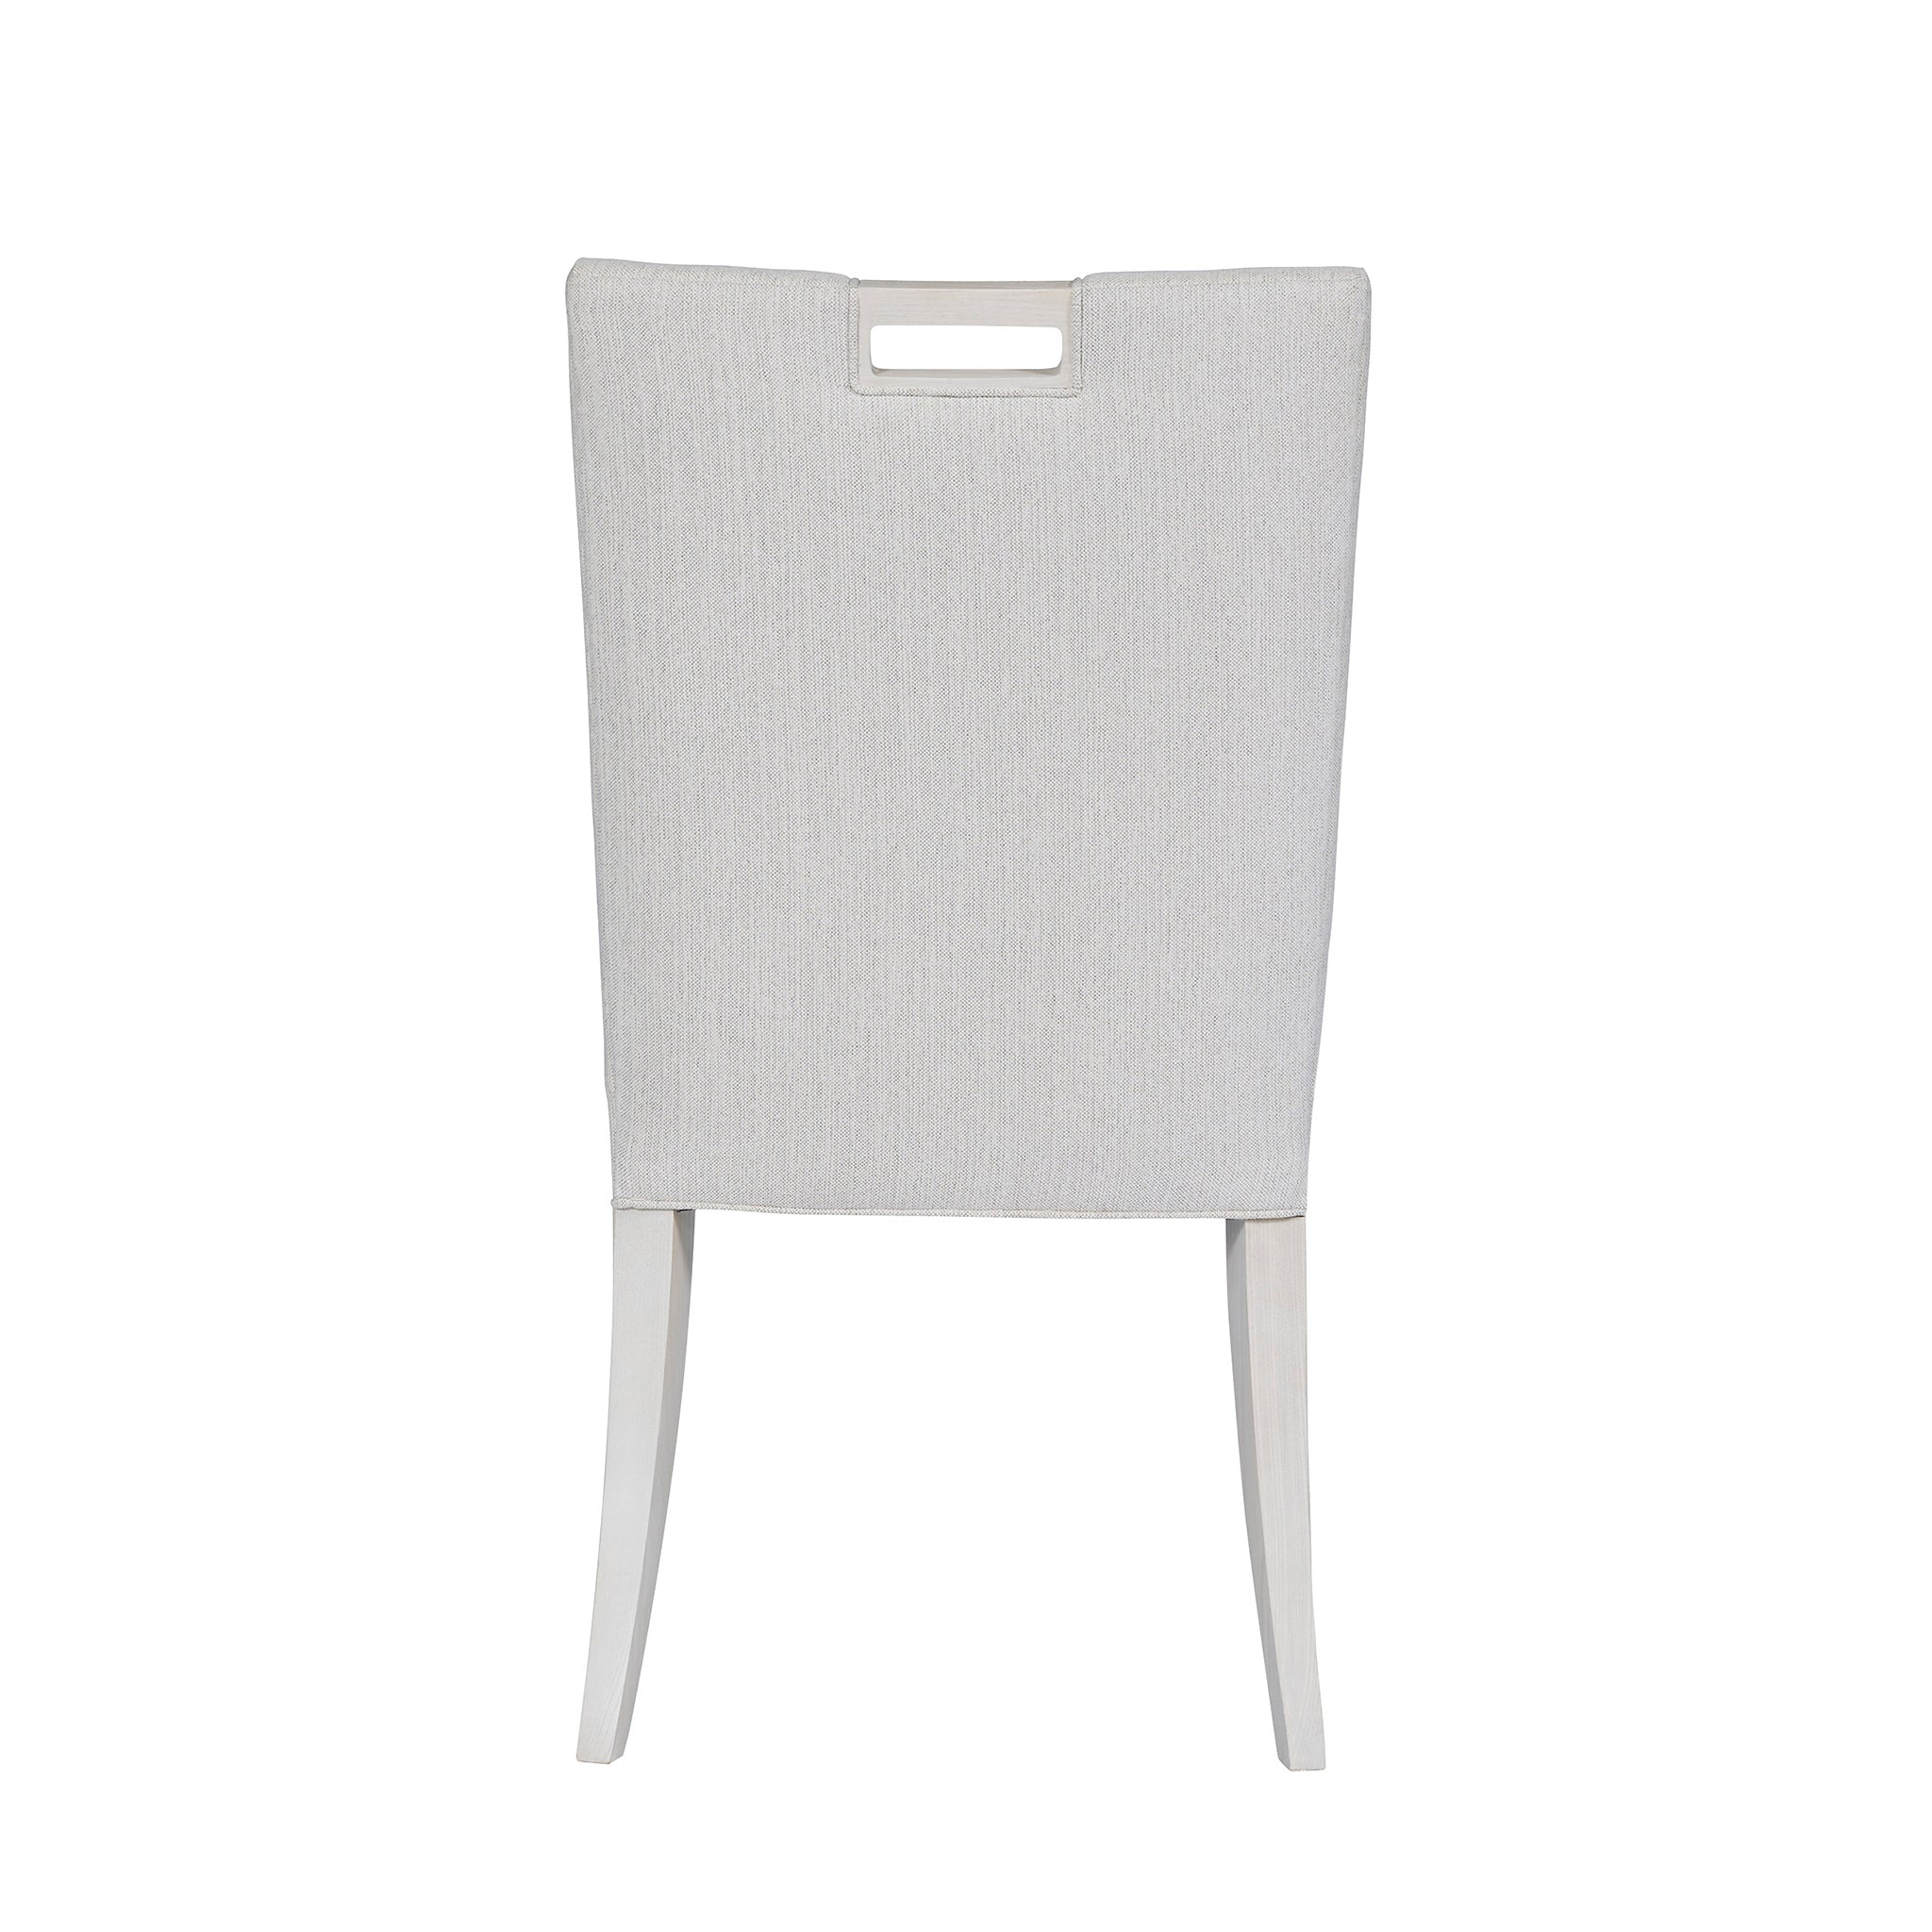 vanguard parkhurst stocked performance dining side chair dining chairs 